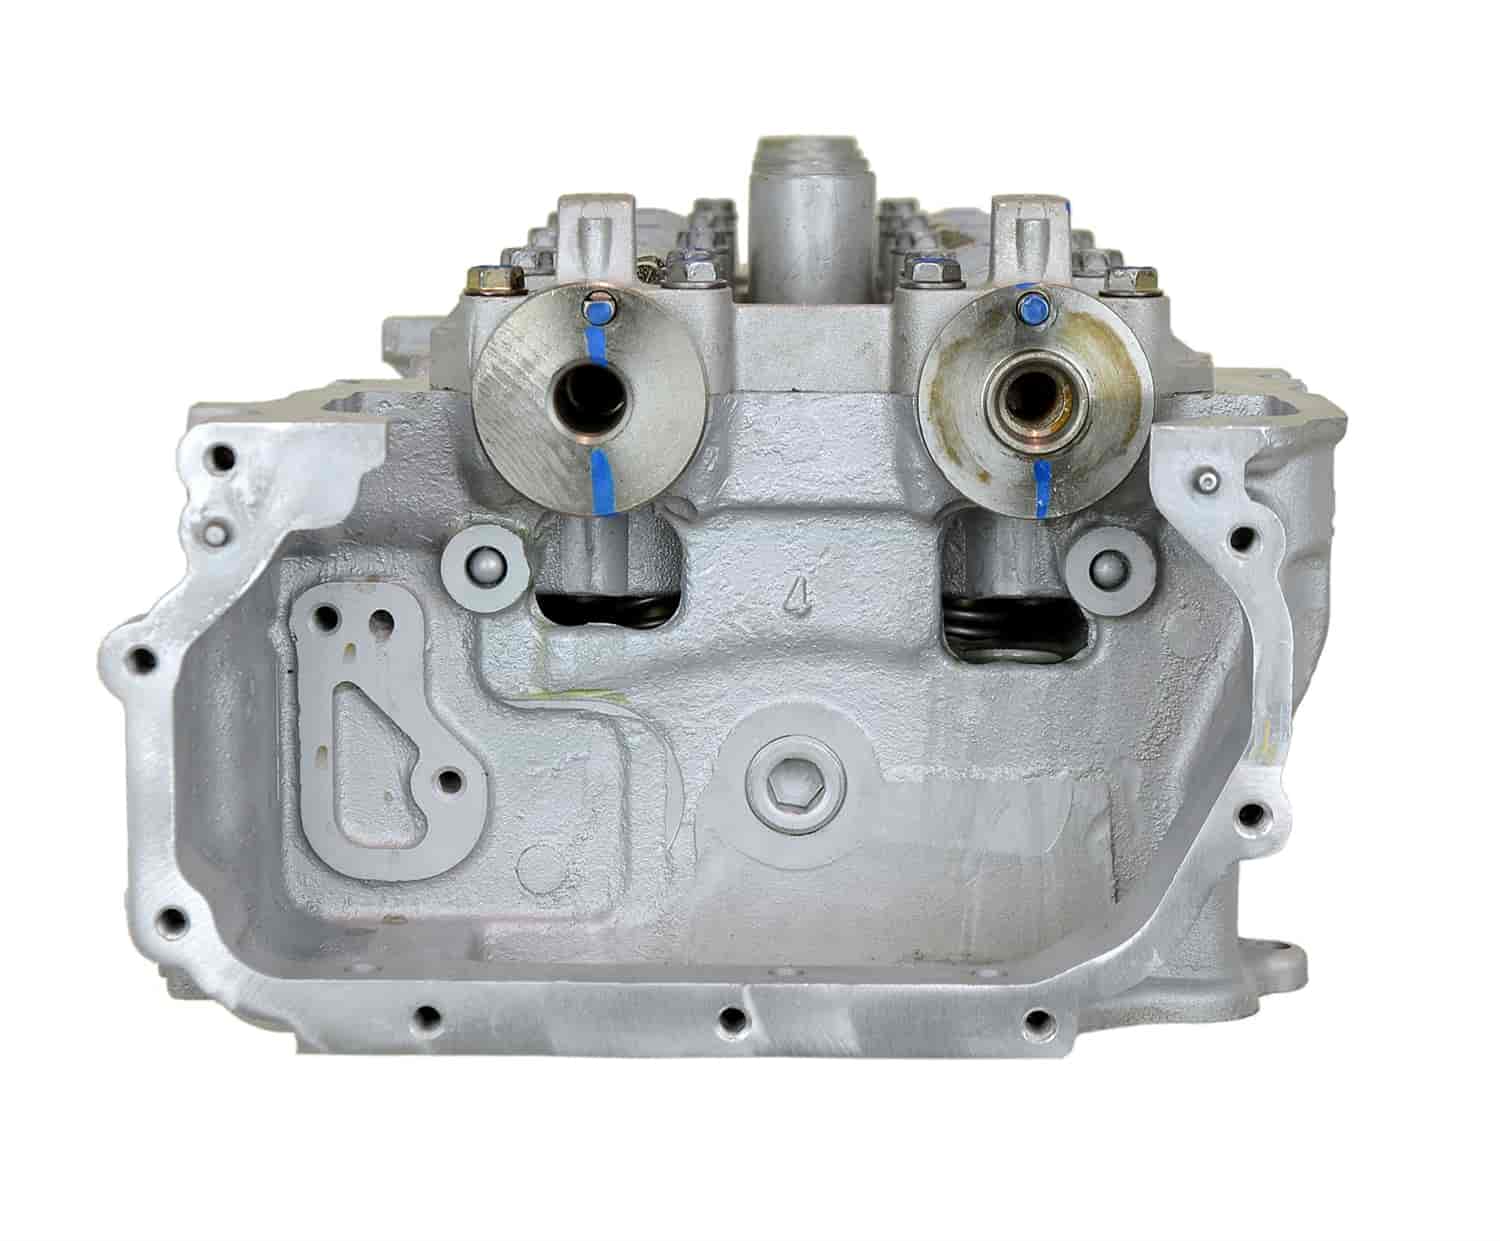 Remanufactured Cylinder Head for 2000-2002 Nissan with 1.8L